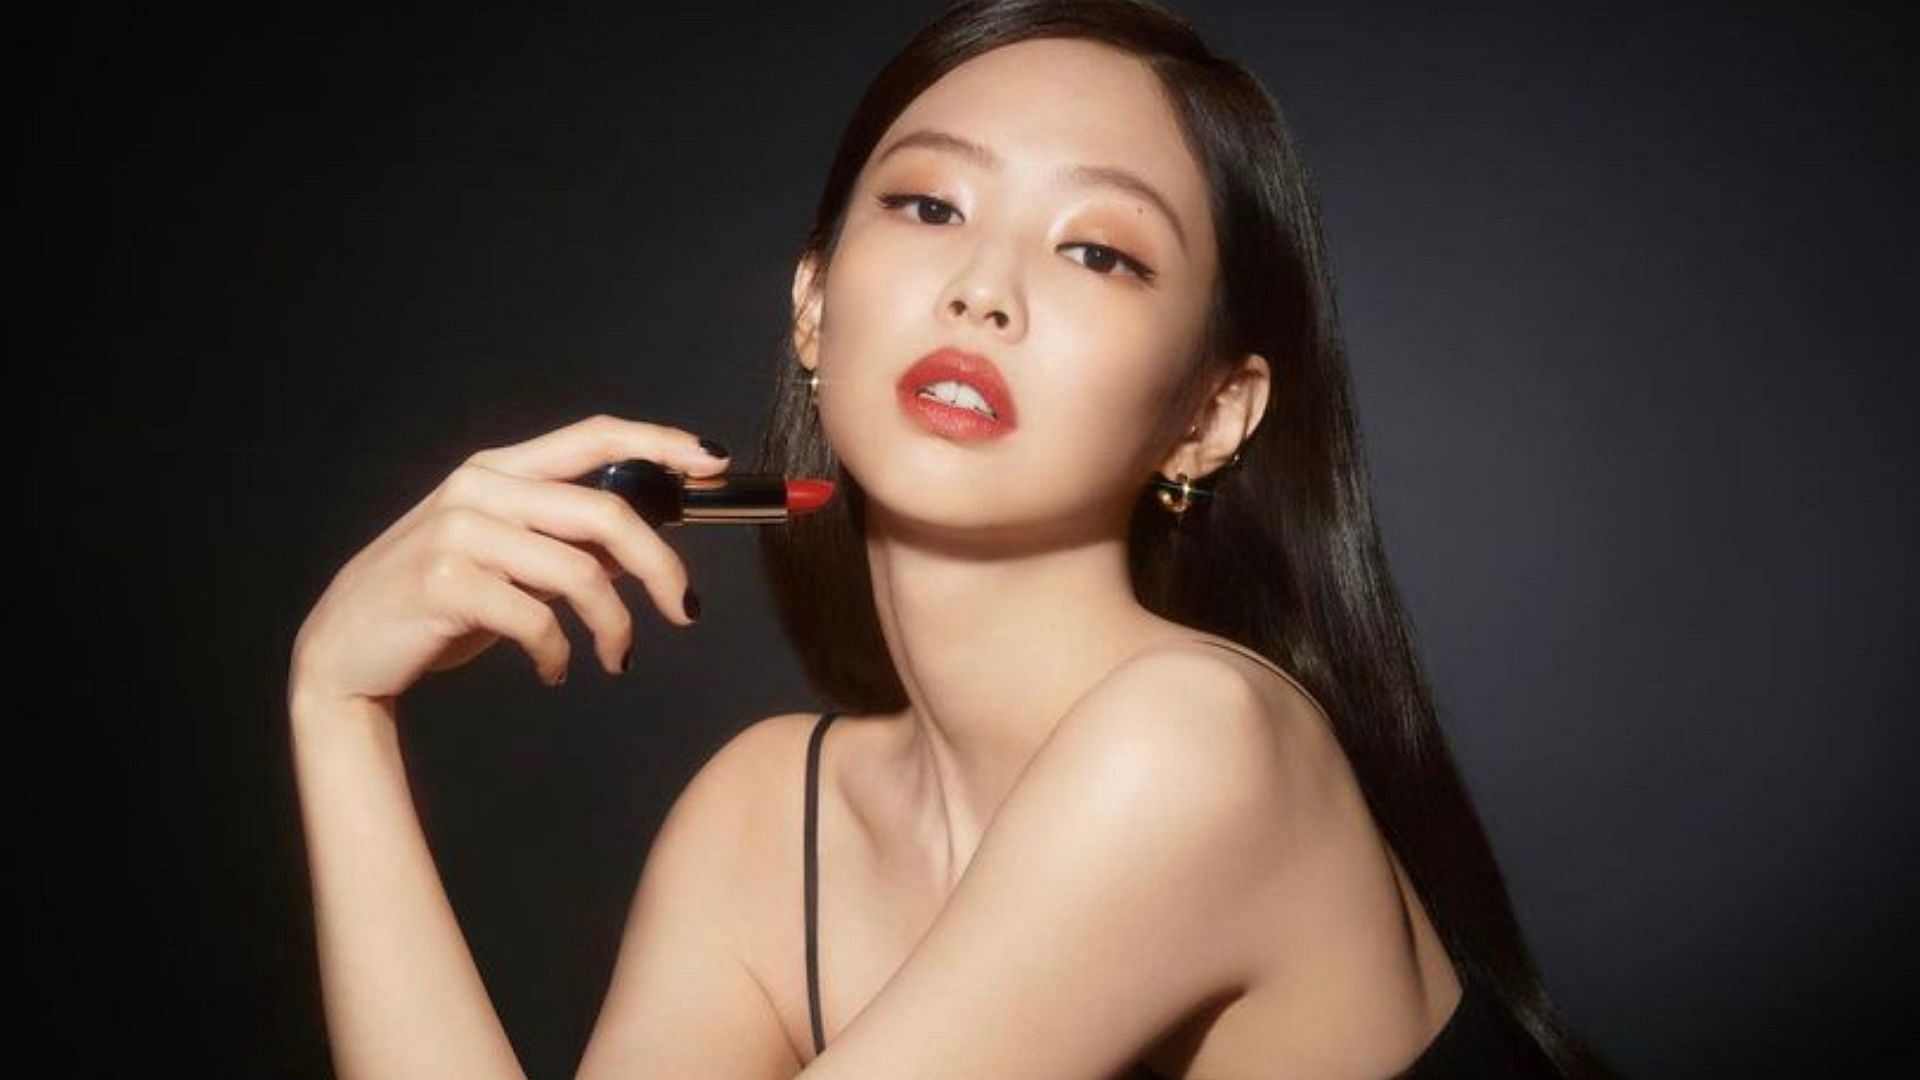 BLACKPINK's Jennie stuns fans in latest commercial for beauty